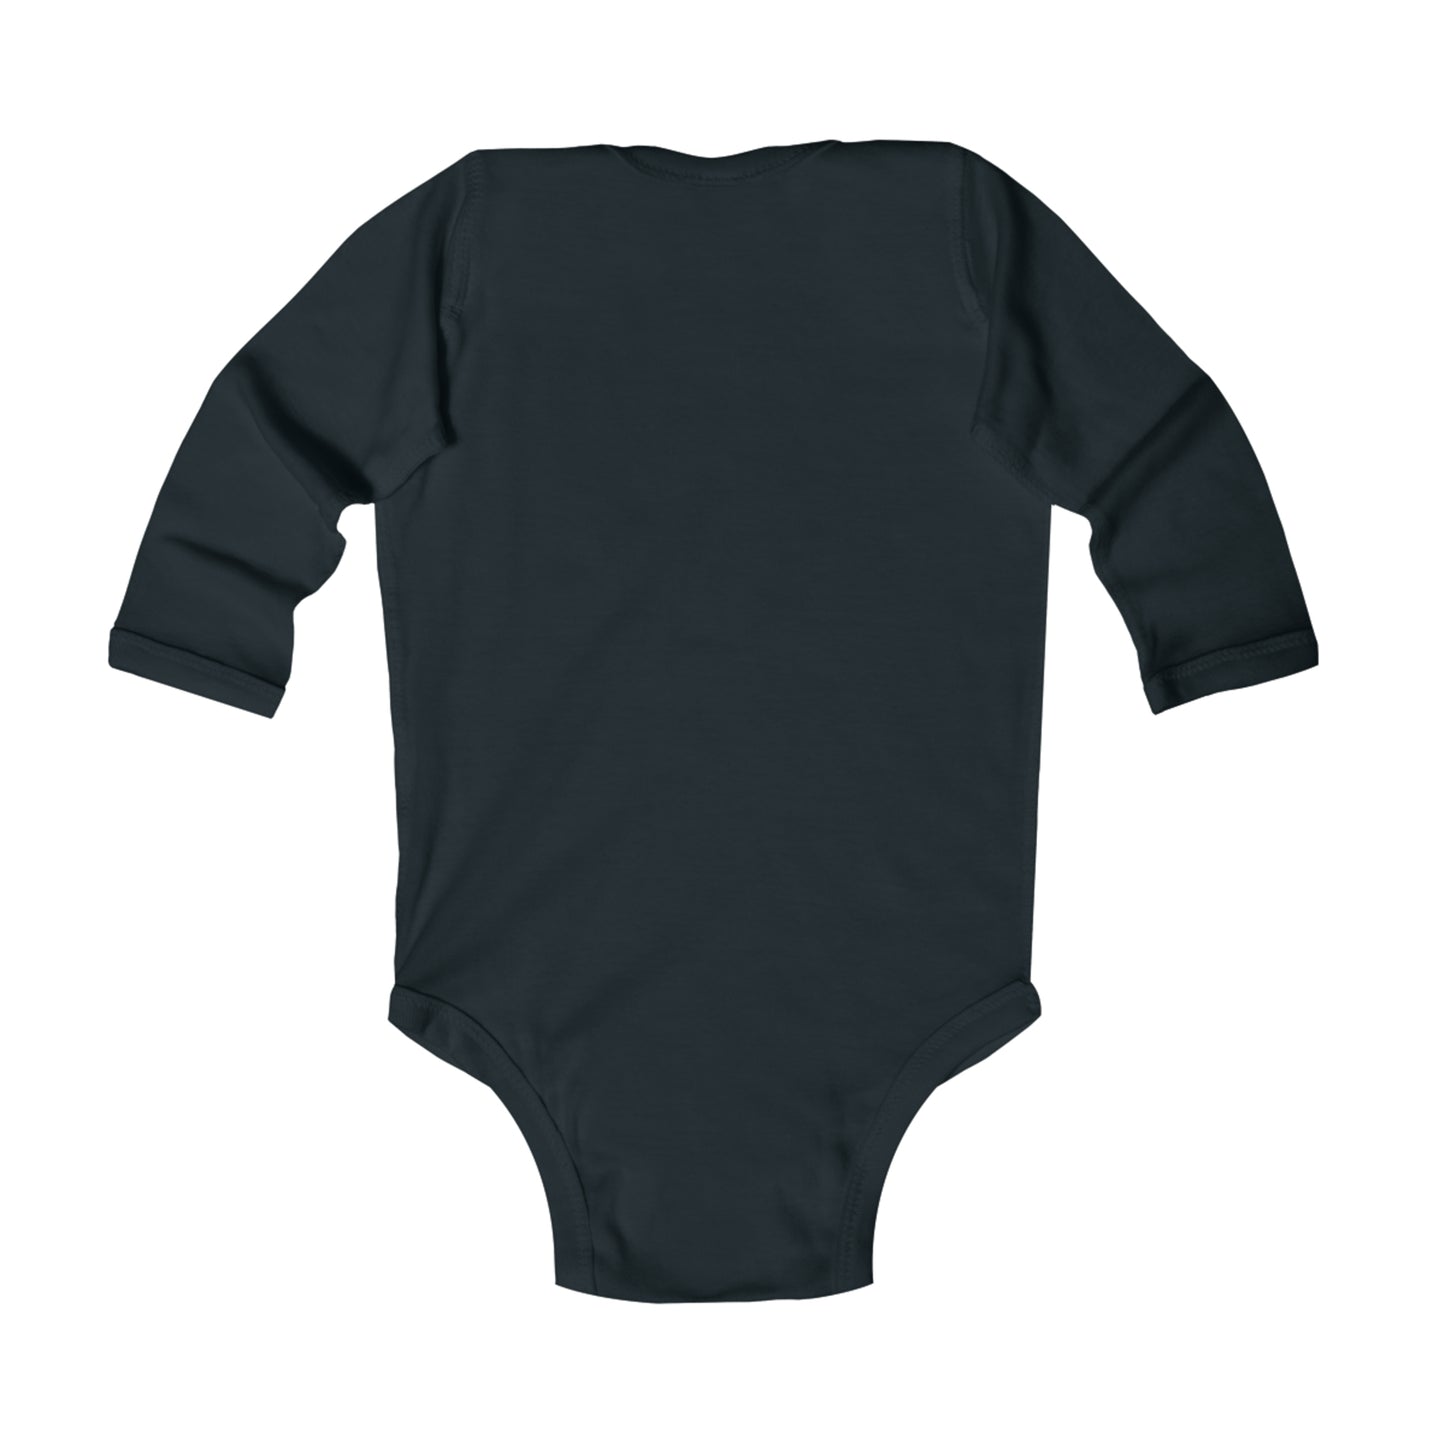 "My First Halloween" Infant Long Sleeve Bodysuit, Comes in Various Sizes, Snaps at the Closure